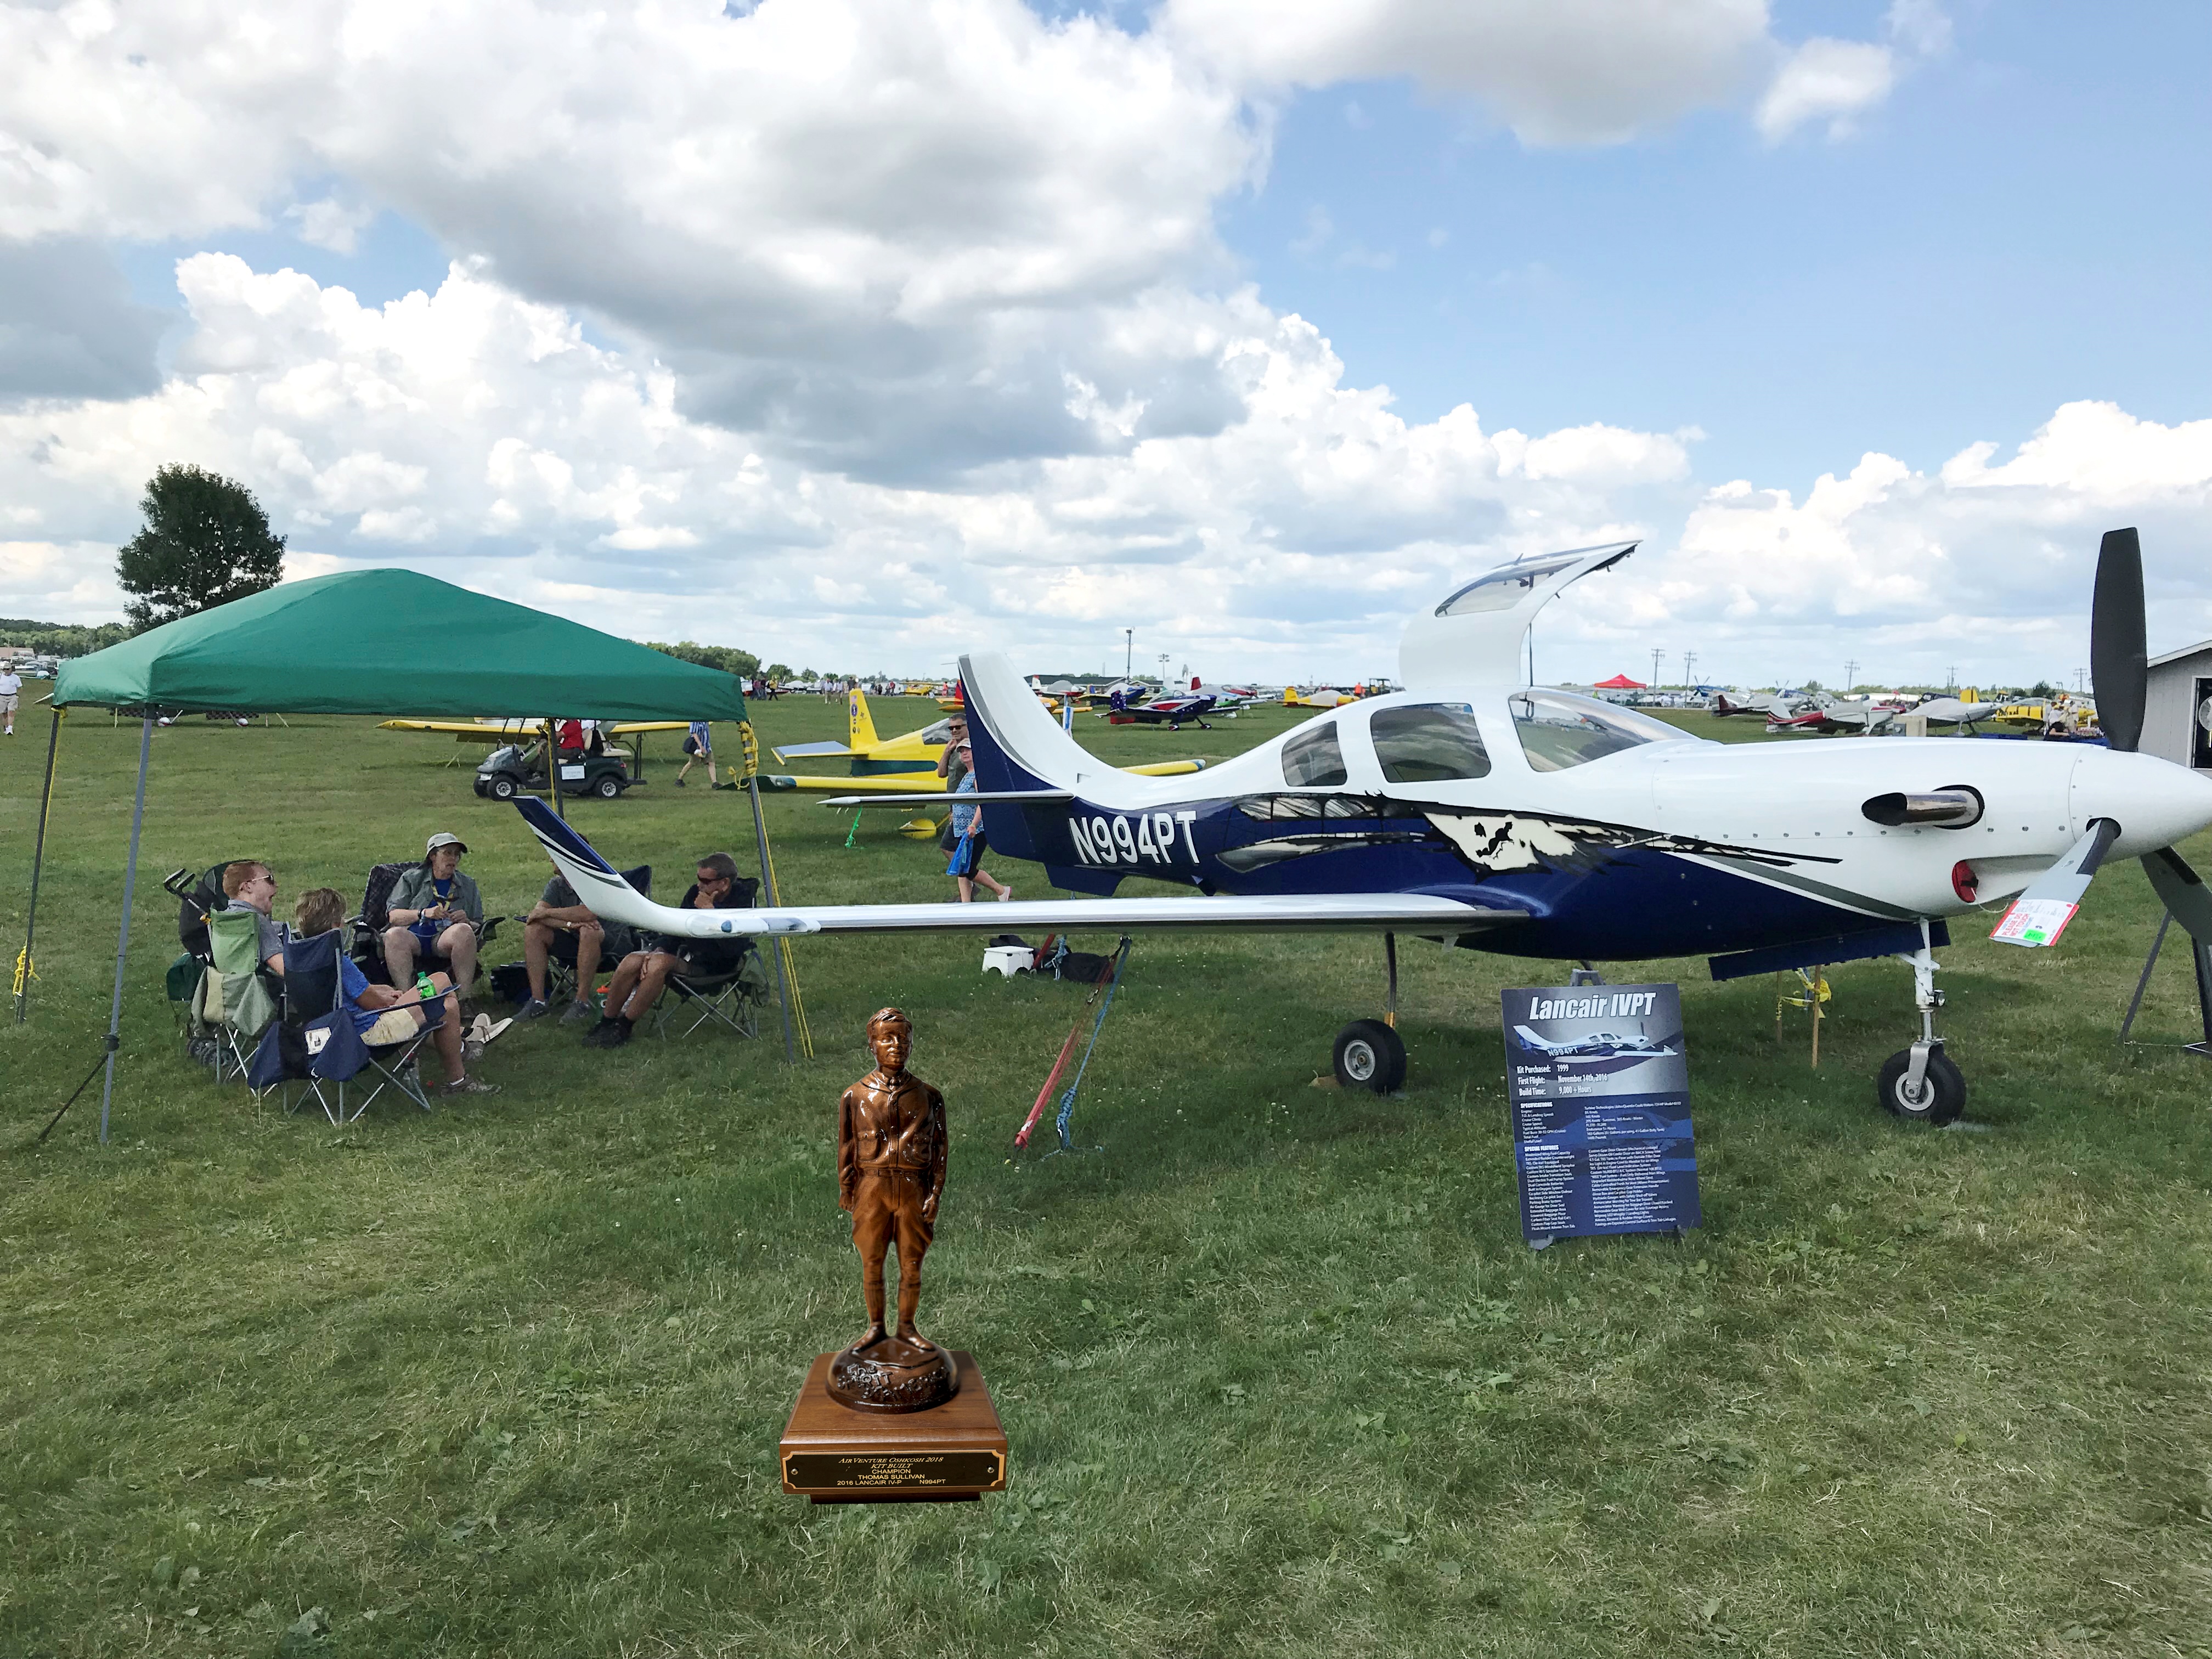 Picture from my Oshkosh judged year with my family and friends with me under the tent and the Lindy placed in the picture for motivation during my rebuild.  It’s been placed in a 3’ x 4’ picture frame in the garage where we are rebuilding the plane.